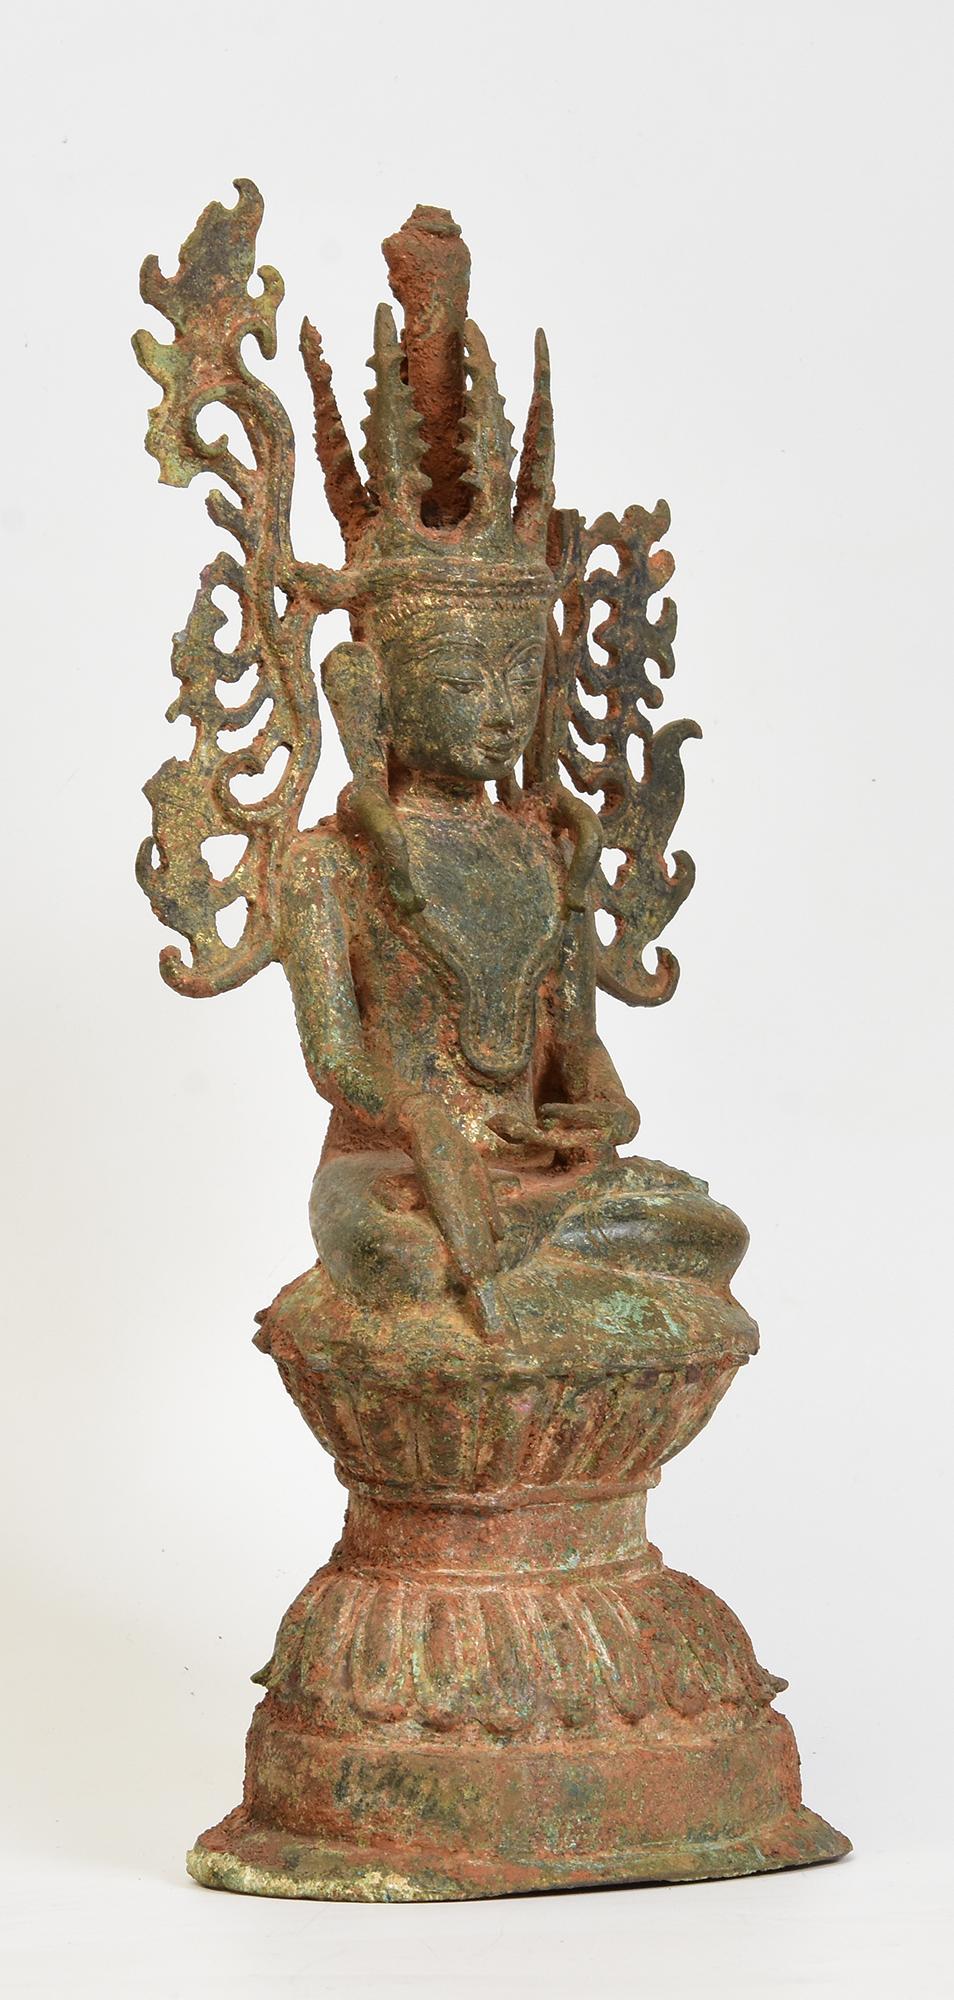 16th Century, Shan, Antique Burmese Bronze Seated King Crowned Buddha Statue For Sale 6